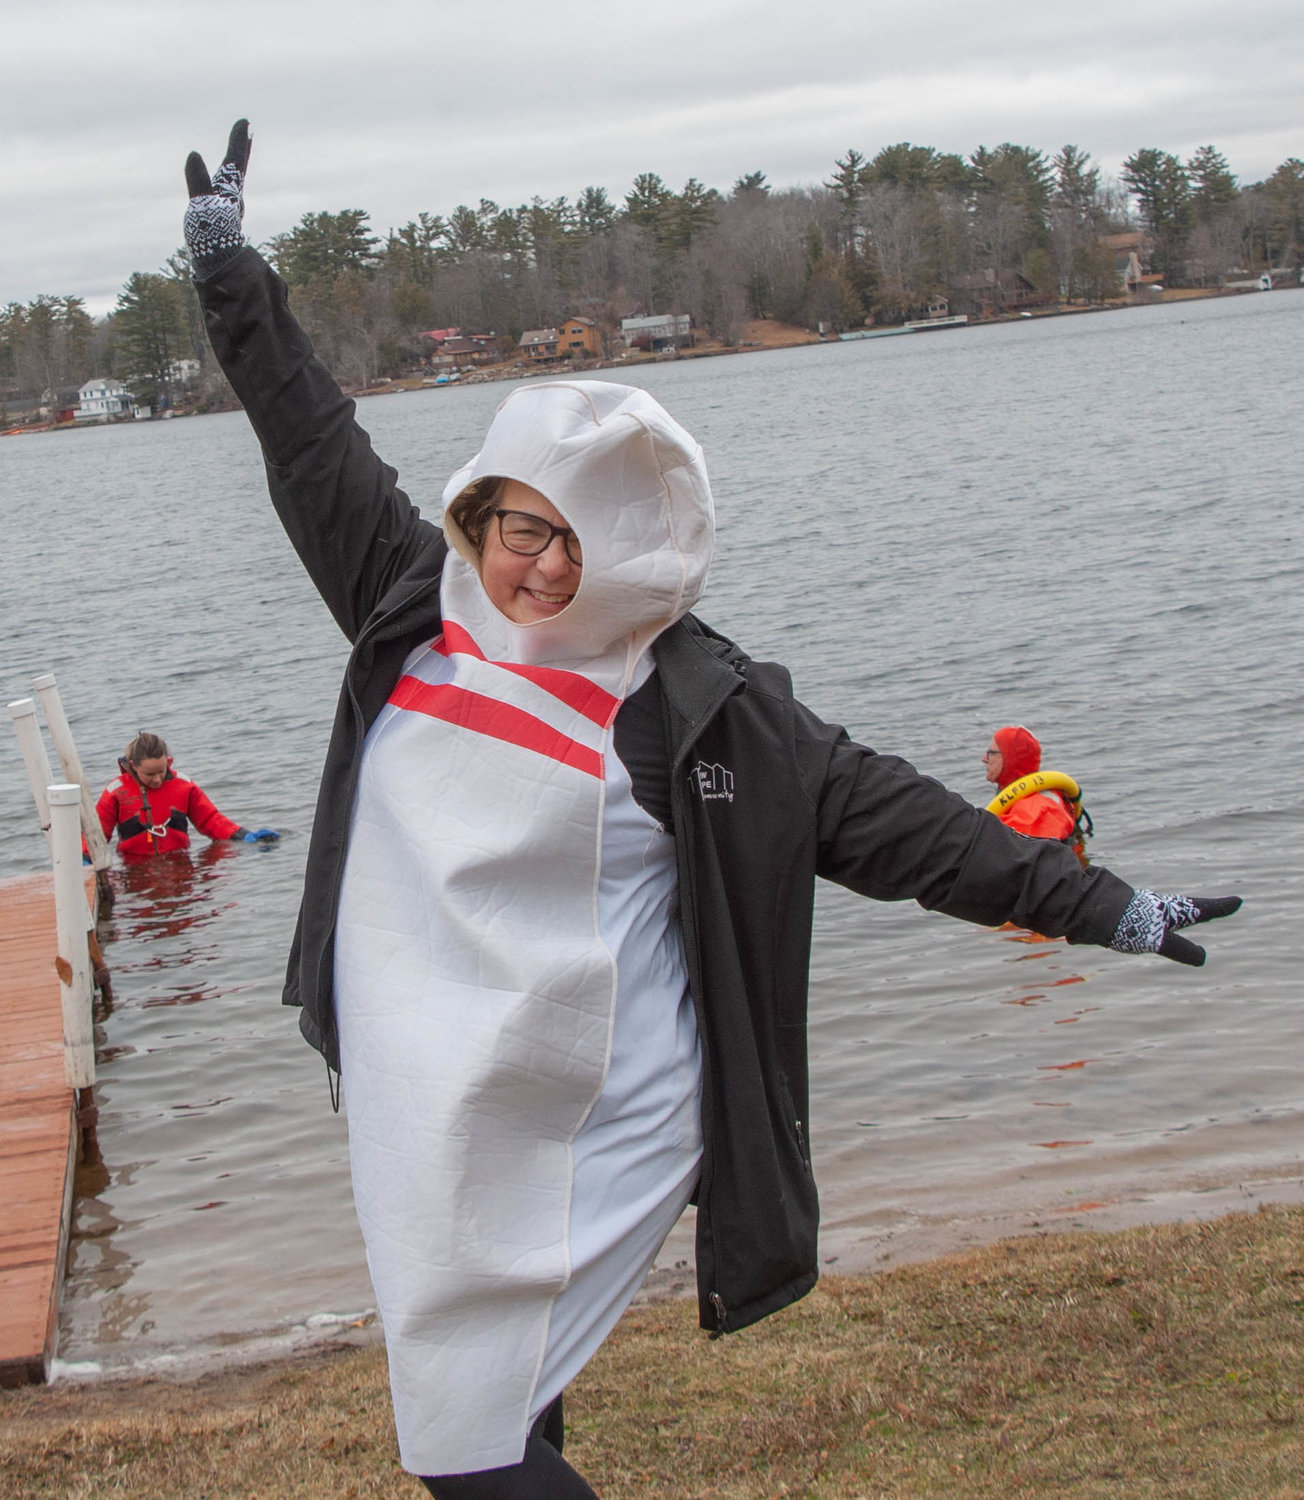 Sullivan County Chamber of Commerce president Jaime Schmeiser was all smiles before taking a jump in the lake at the Polar Bear Jump fundraiser last weekend.